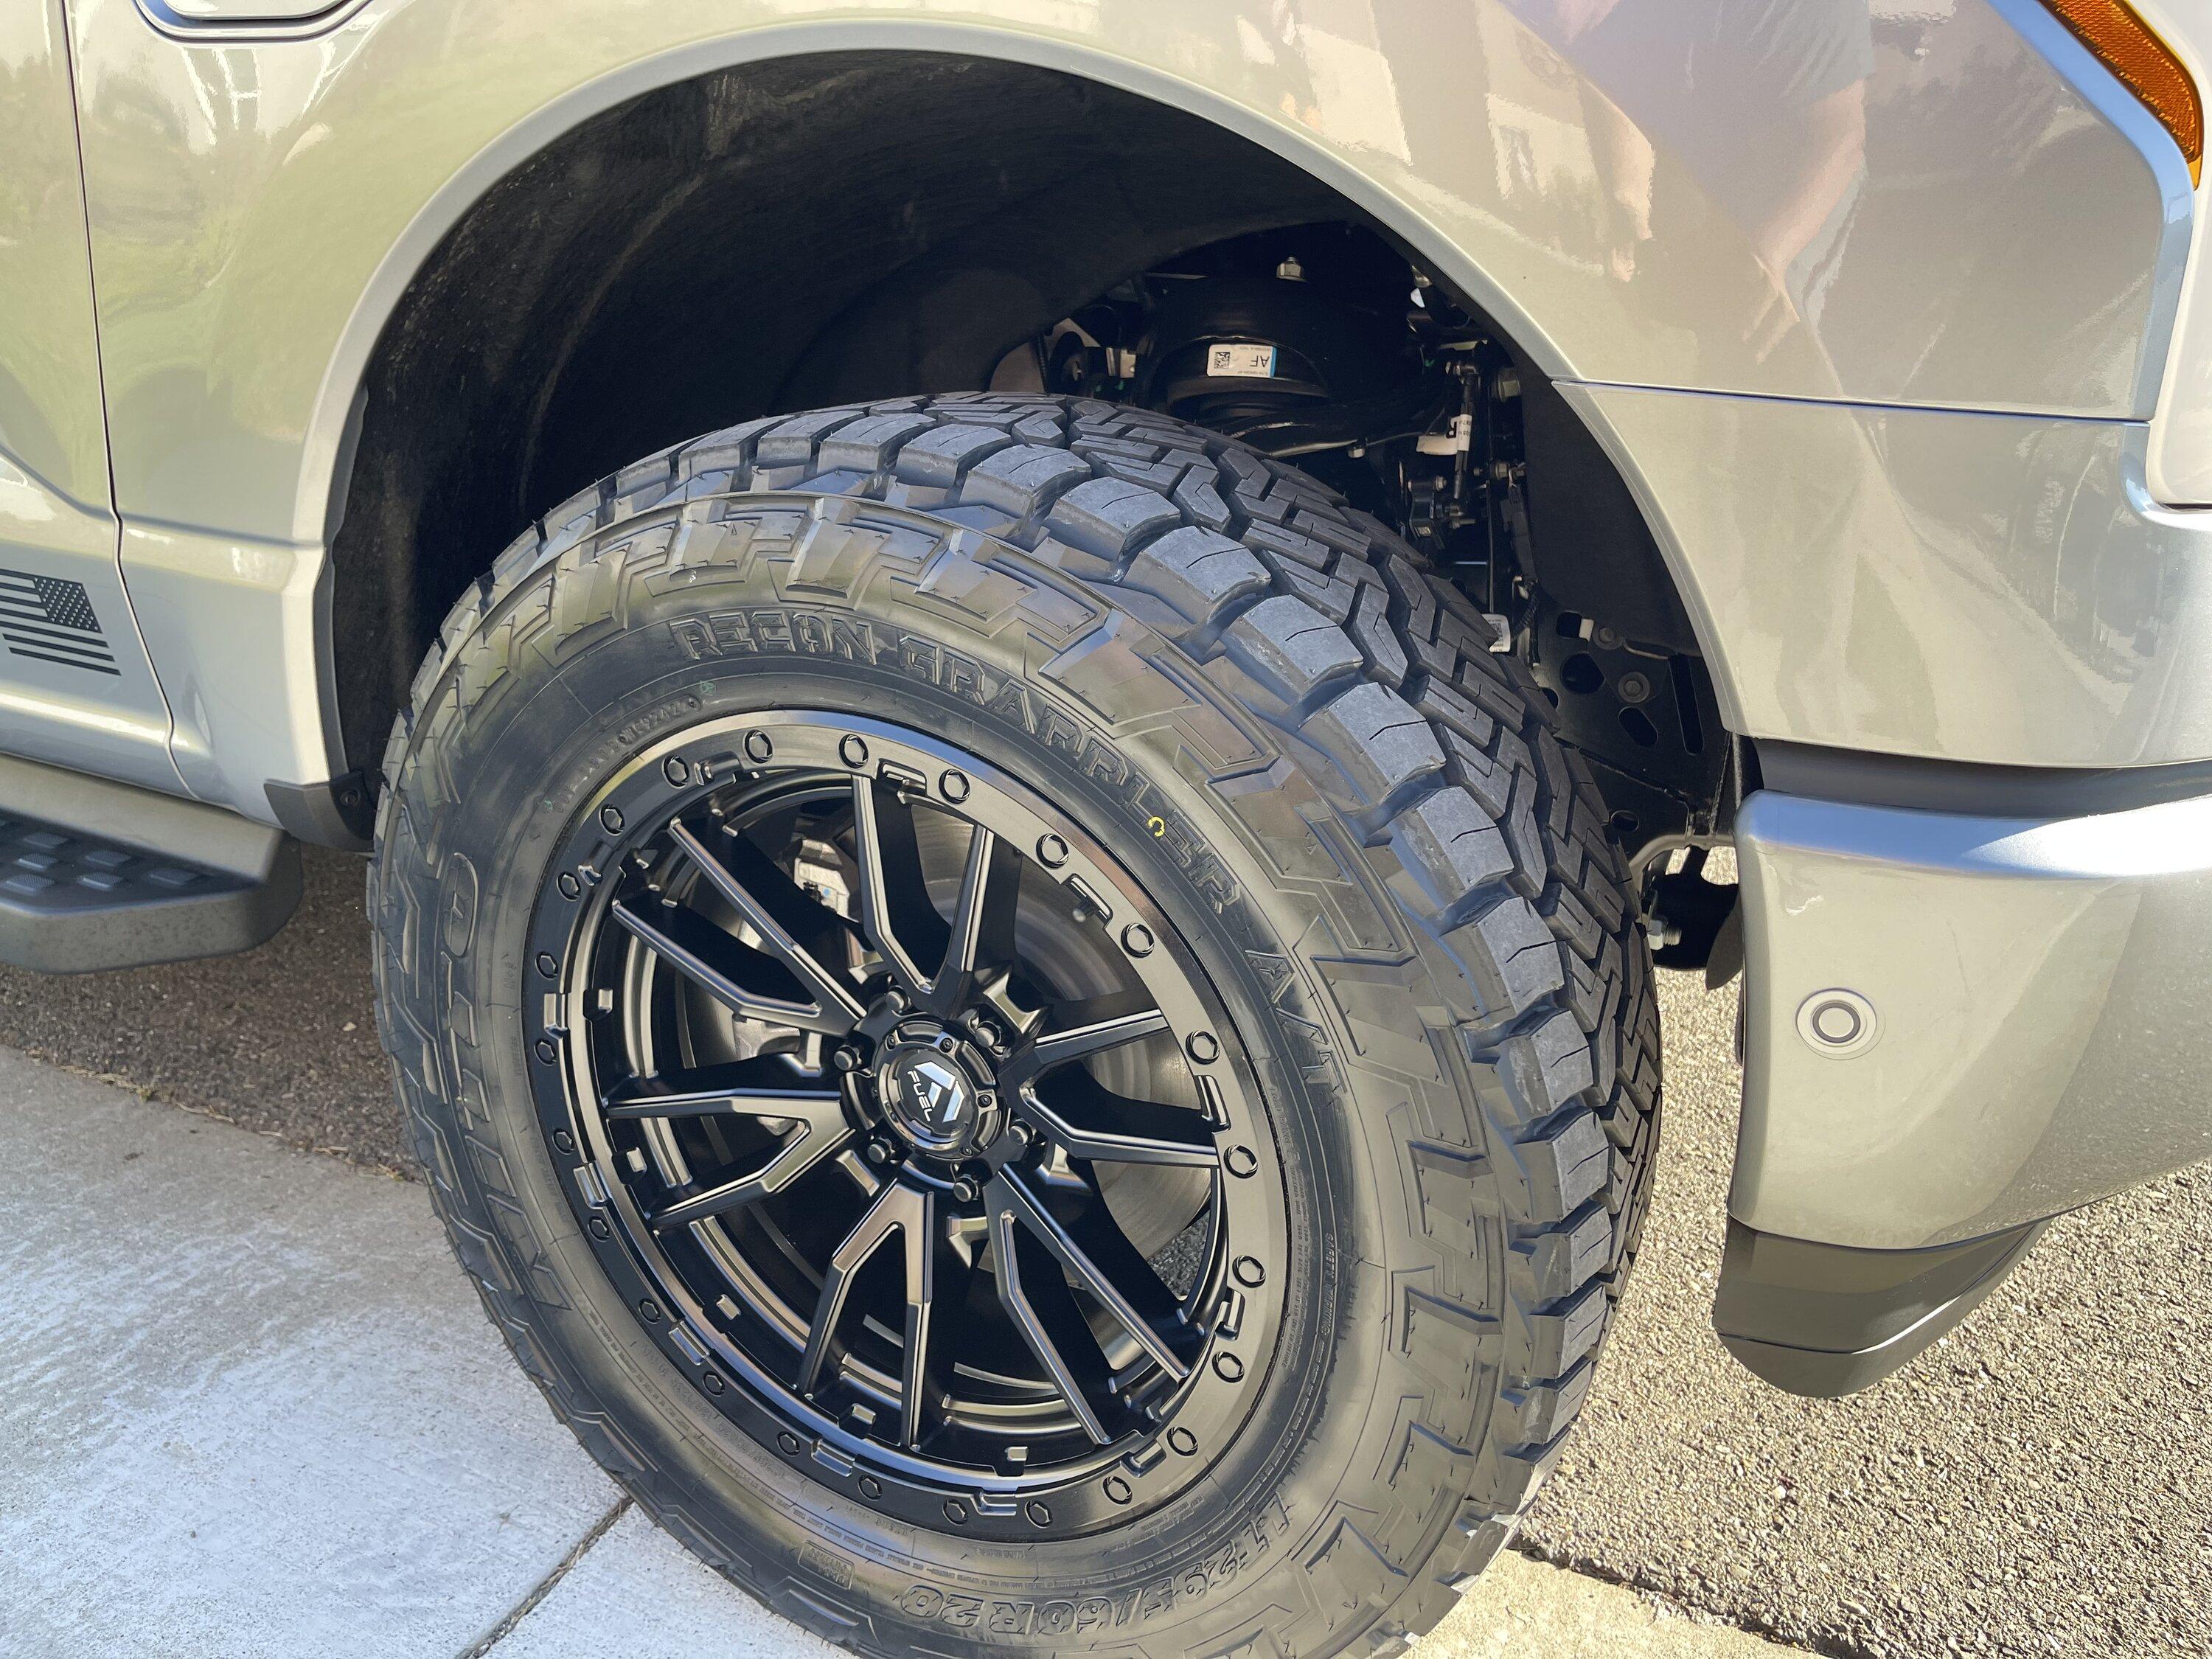 Ford F-150 Lightning ReadyLift 2" level, Fuel Rebel 20x9 (et +1), and Nitto Recon Grappler 295/60r20 BA6BBA4B-5219-479F-A972-D7DE1D28A256